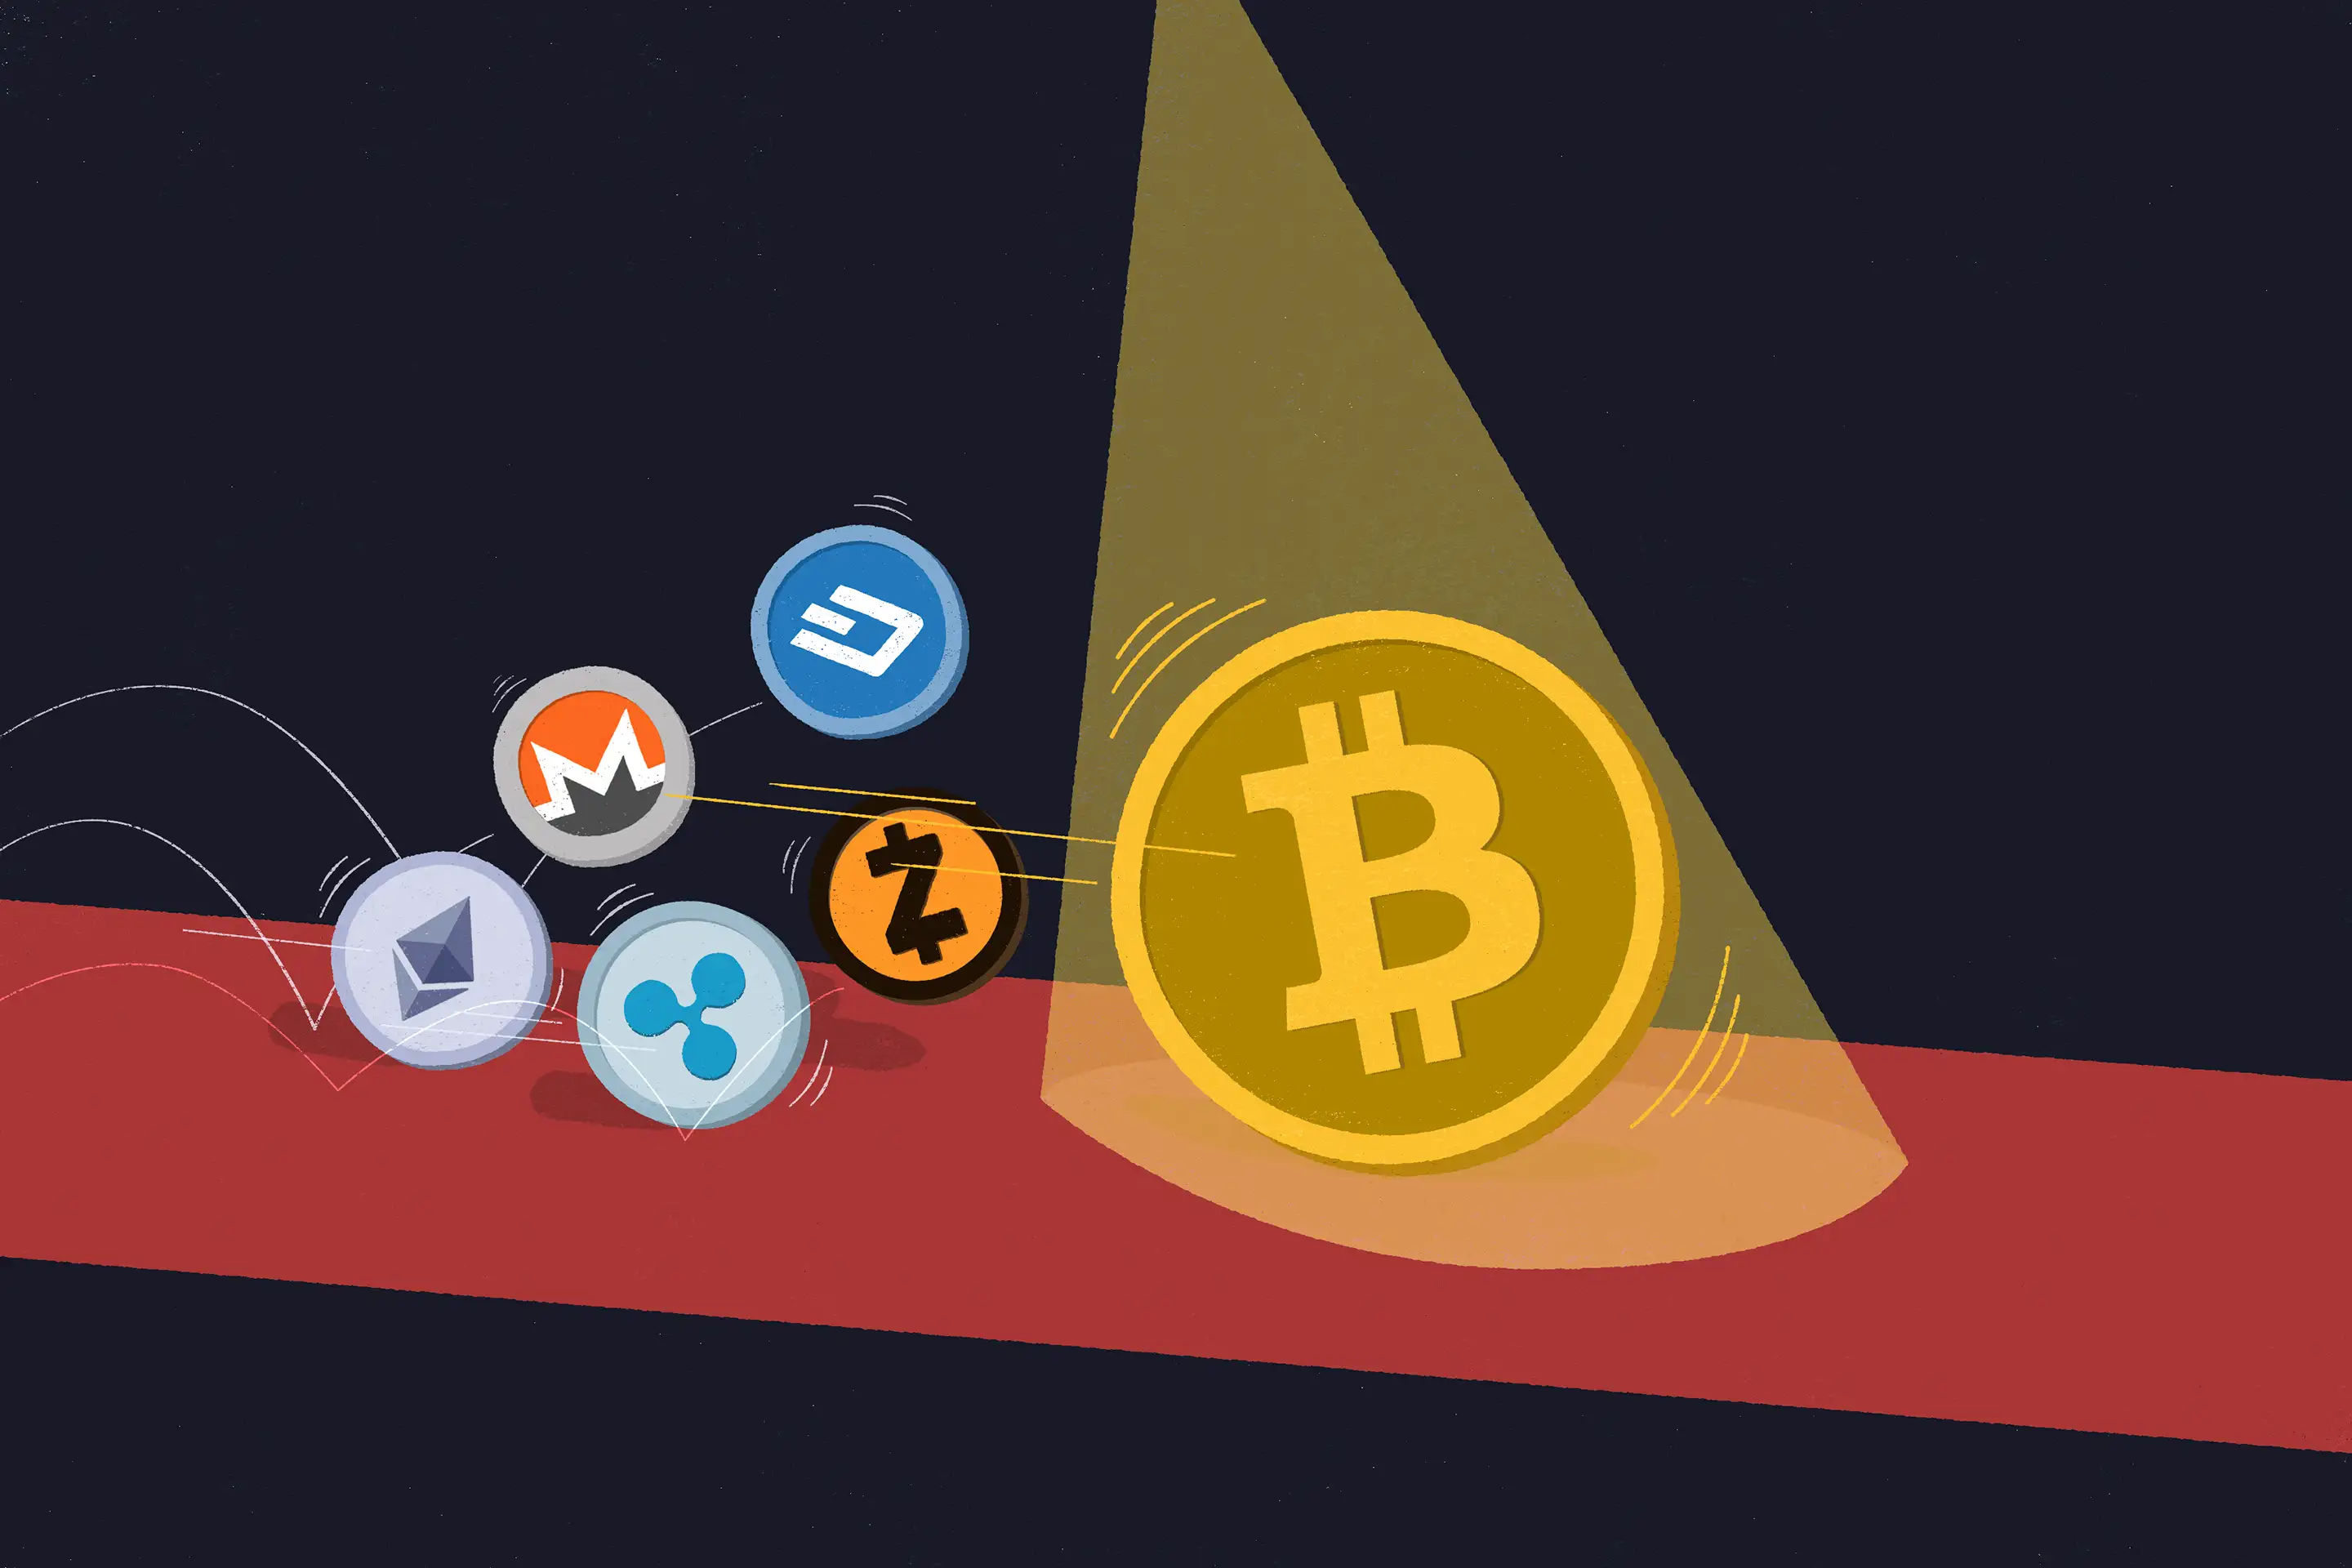 The Flippening: Will Ether Flip Bitcoin in the Next Year? - Blockworks